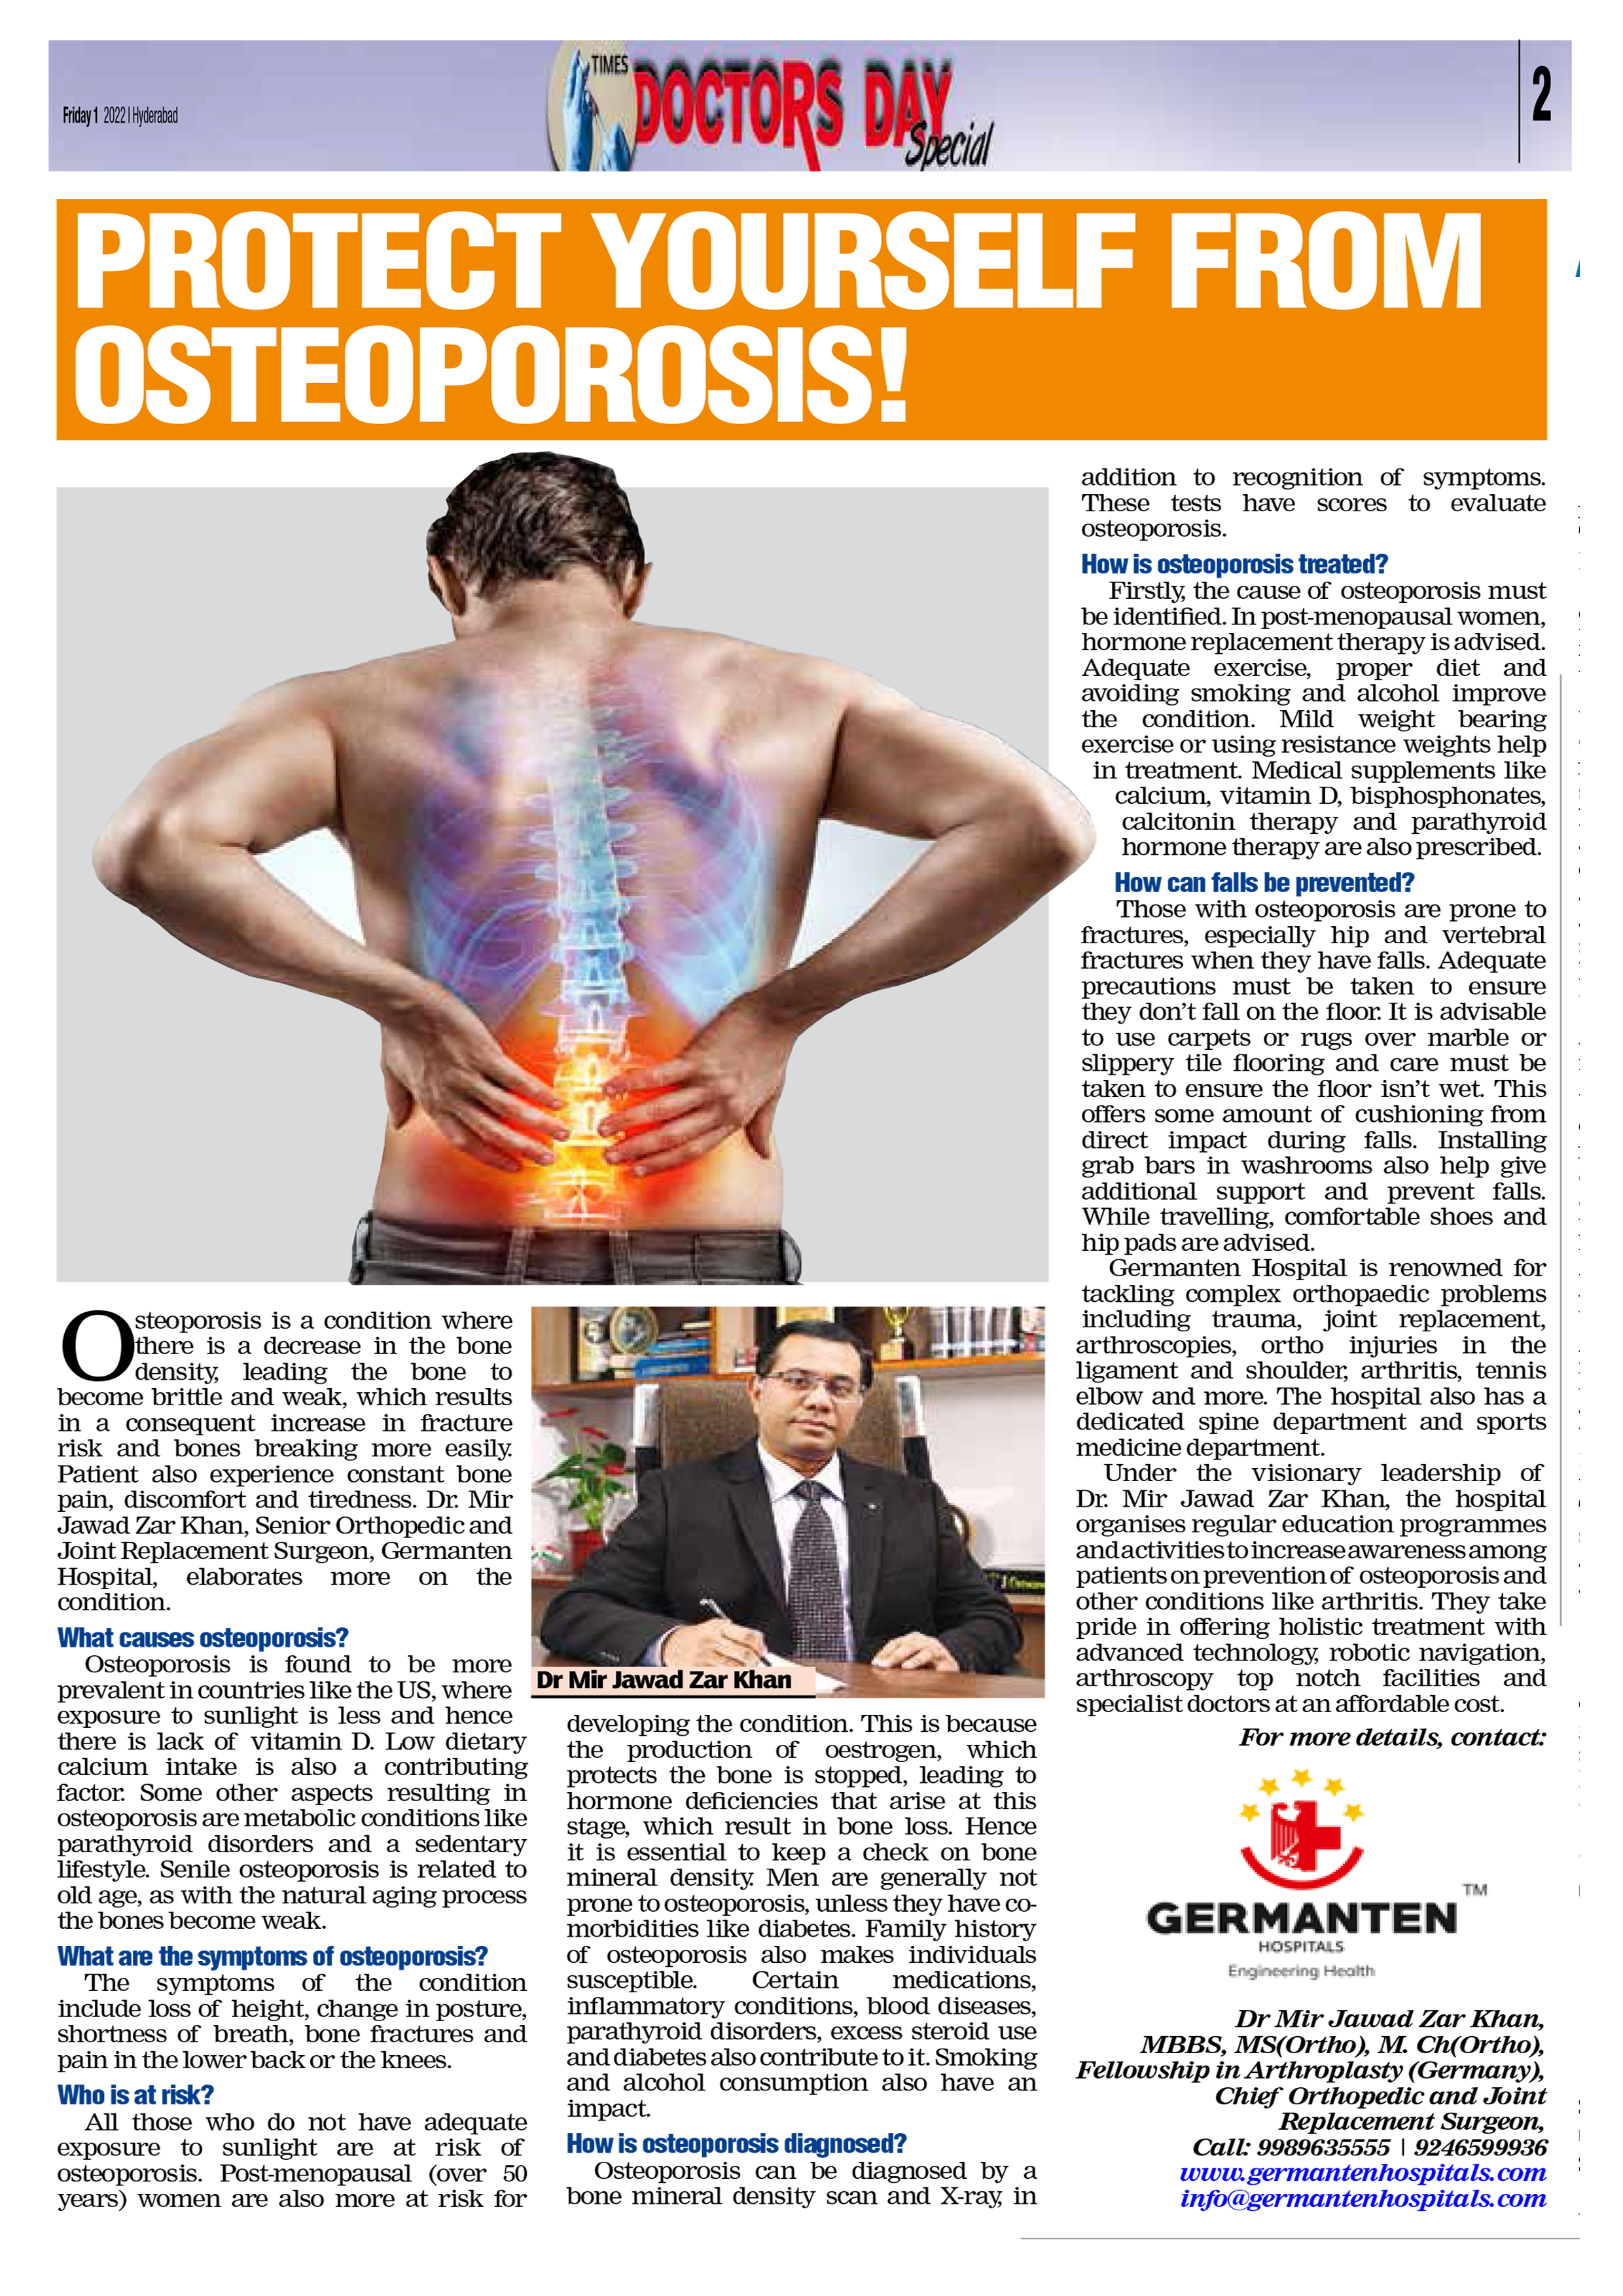 How to protect yourself from osteoporosis